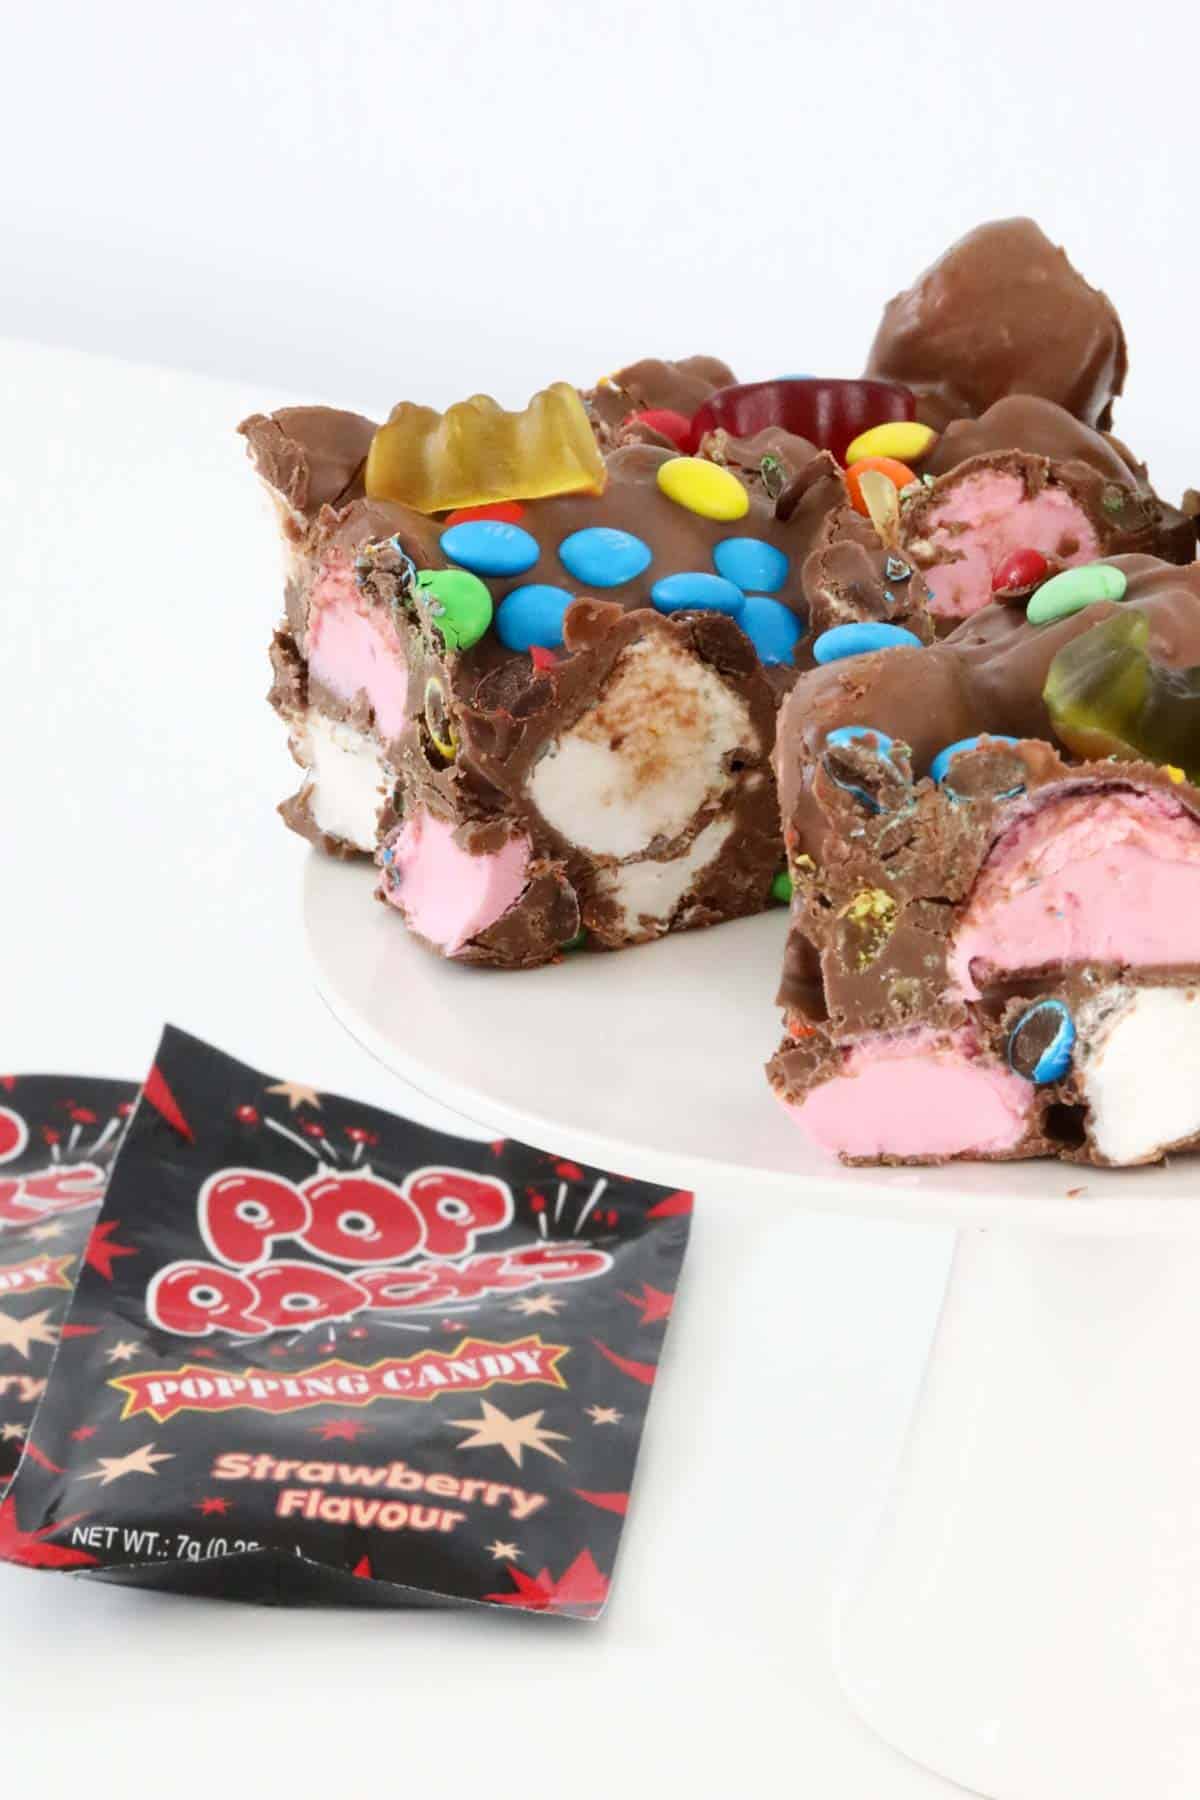 Slices of popping candy rocky road on a white cake stand, with packets of popping candy to the left side.